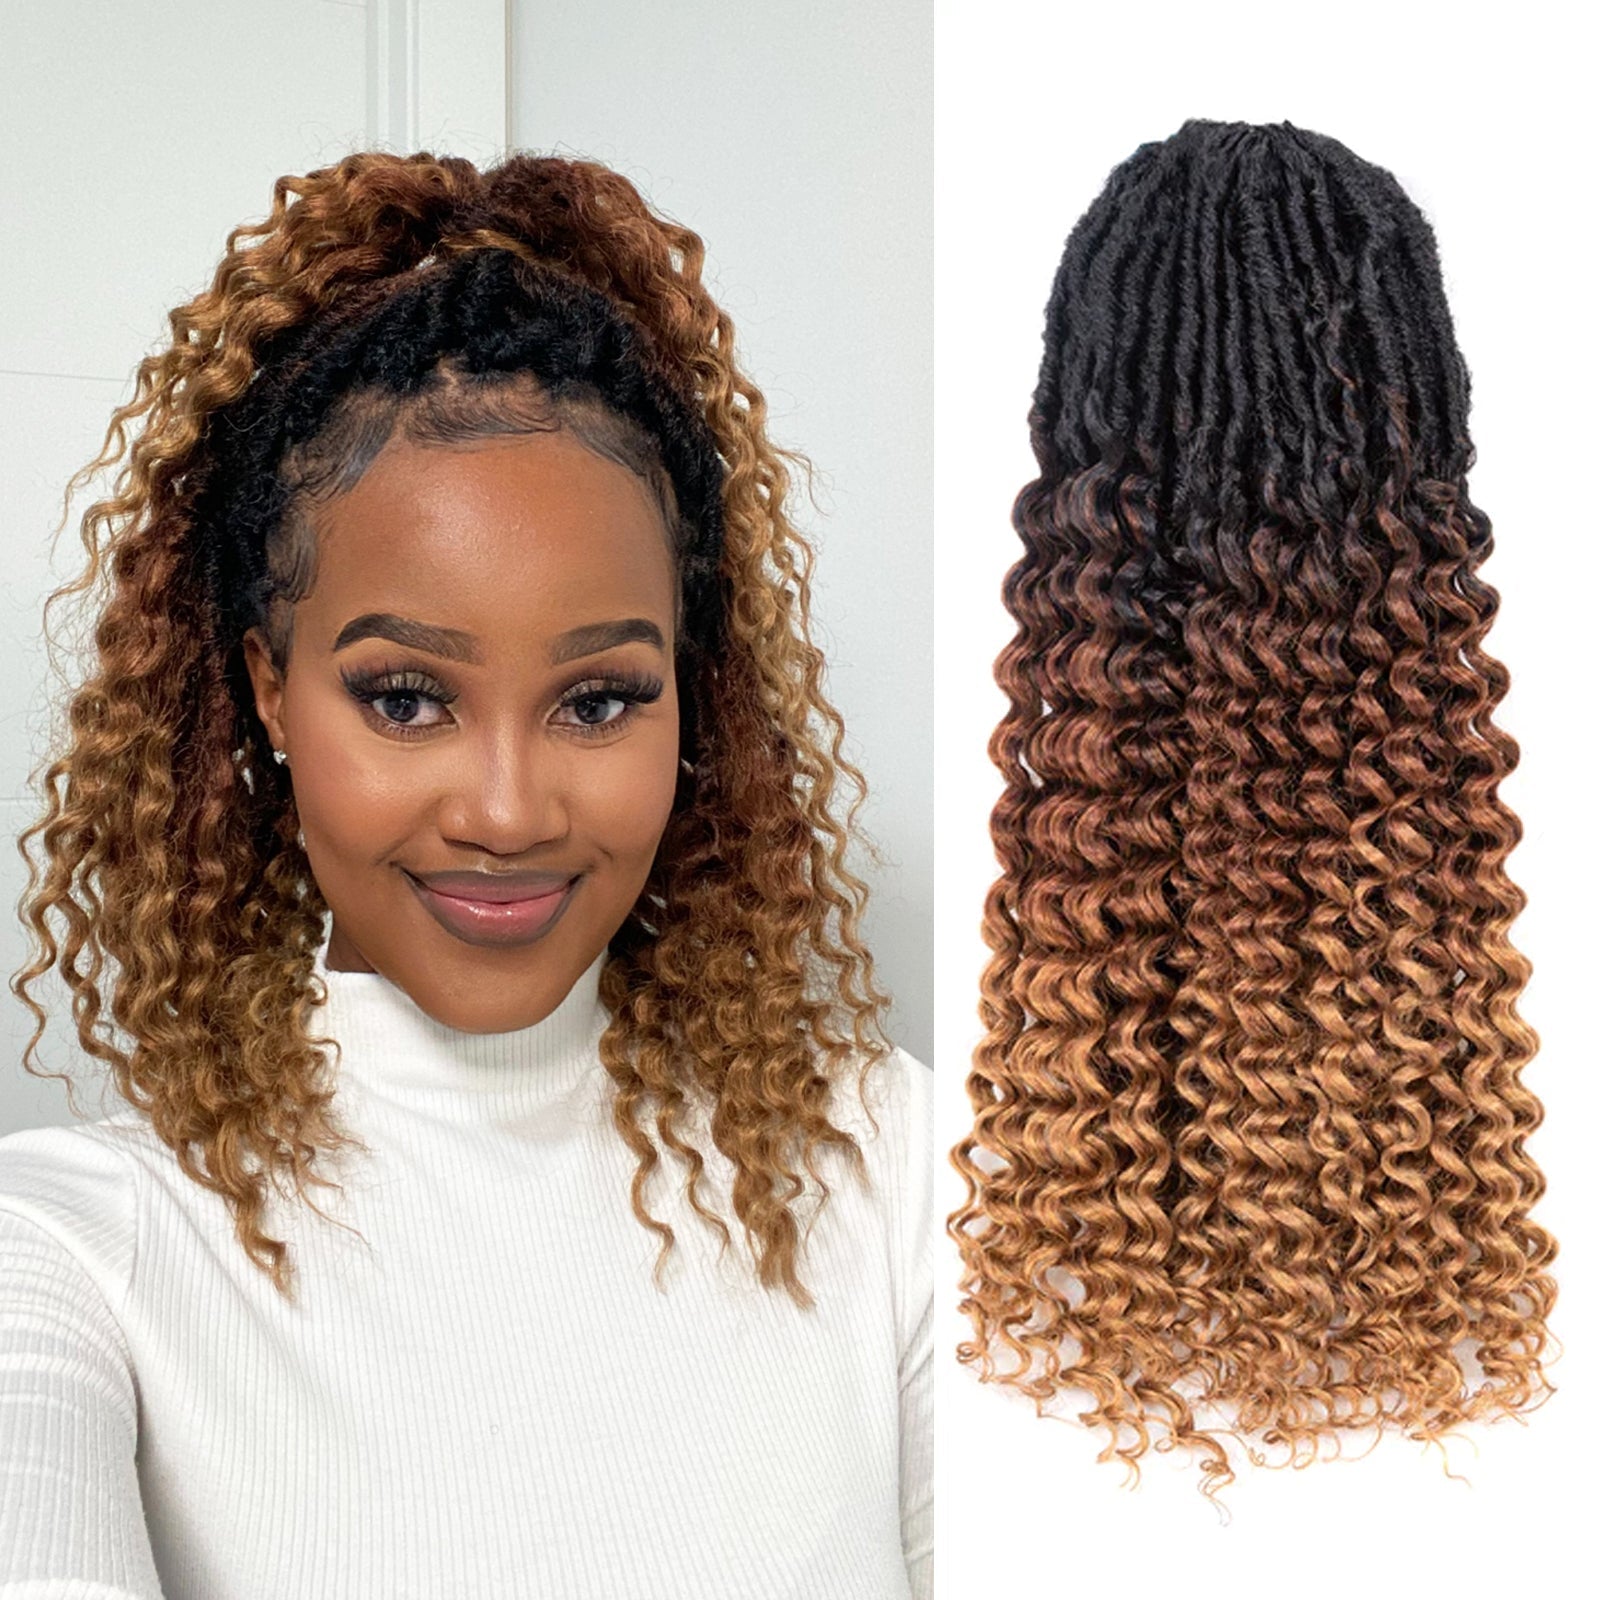 Toyotress Unique Deep Wave Locs 8 Packs | Crochet French Locs With Long Curly Ends Crochet Hair Pre Looped Deep Wave Locs Braiding Hair For Women